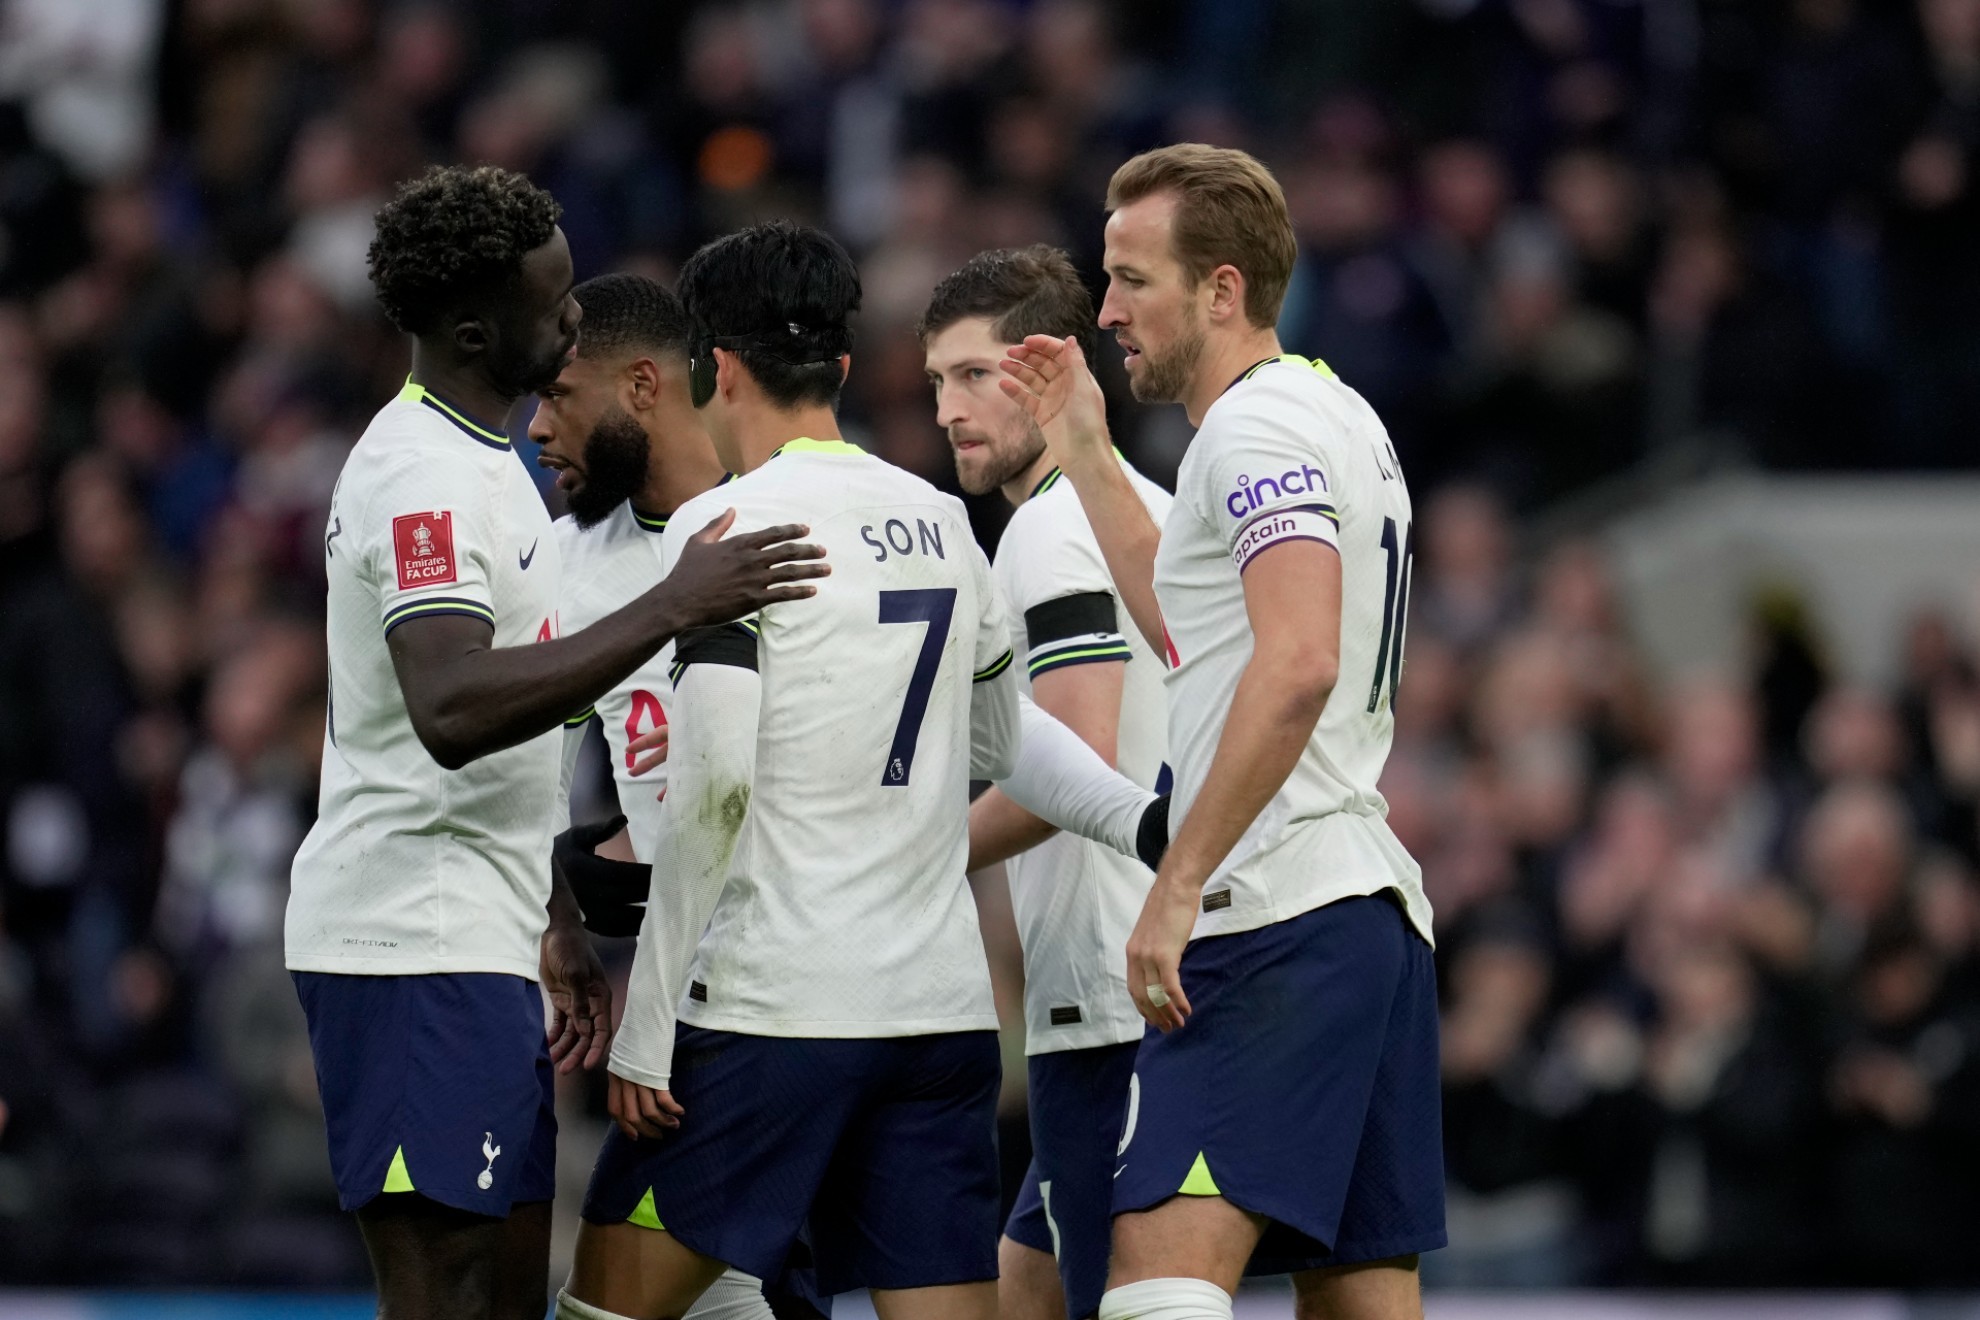 Tottenham's Harry Kane celebrates with teammates after scoring his side's opening goal.